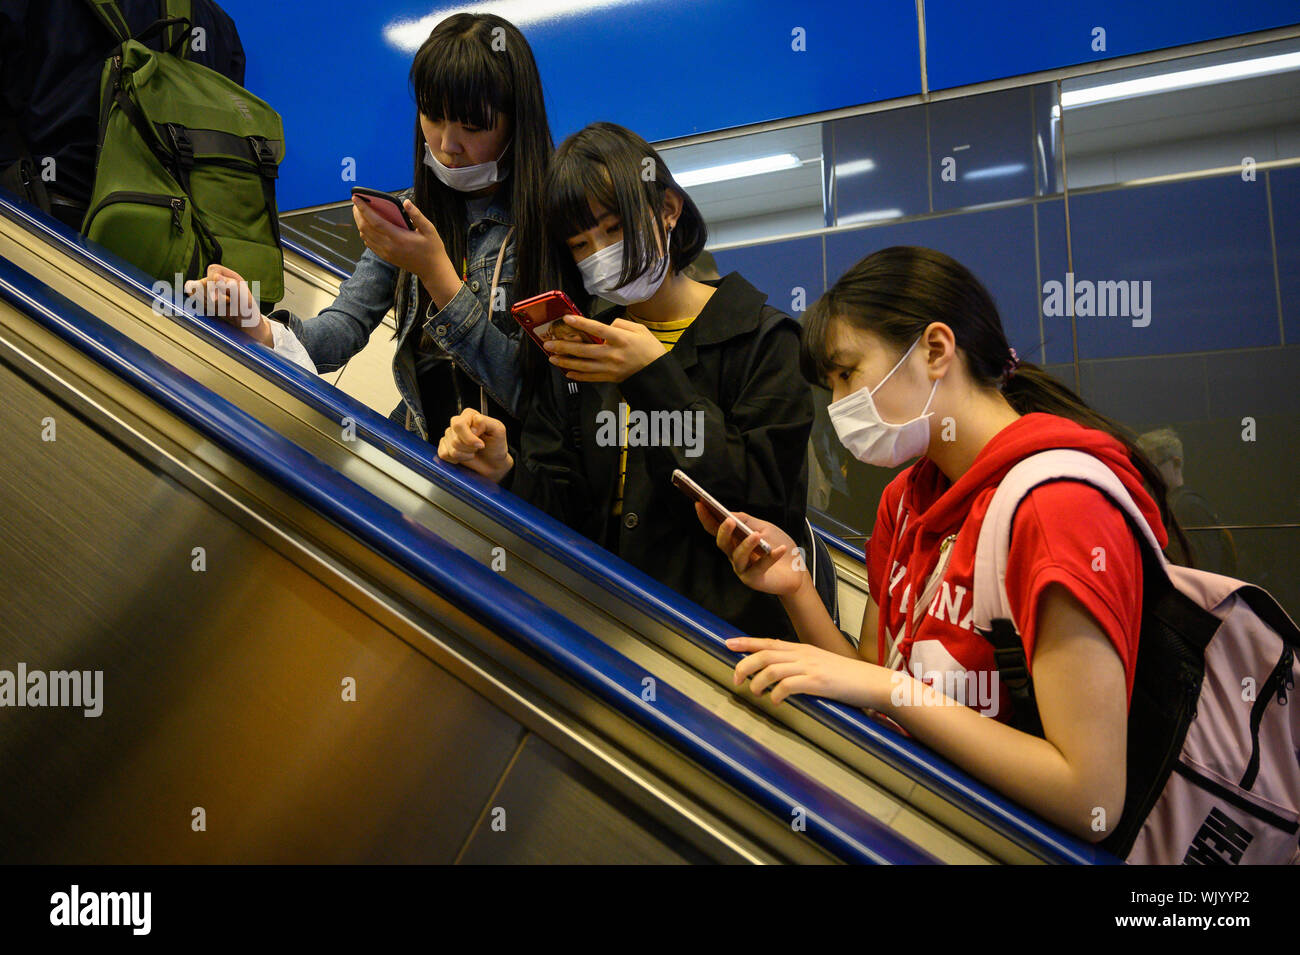 Young Japanese women looking at their mobile phones on an escalator in the Tokyo Metro, Tokyo, Japan Stock Photo